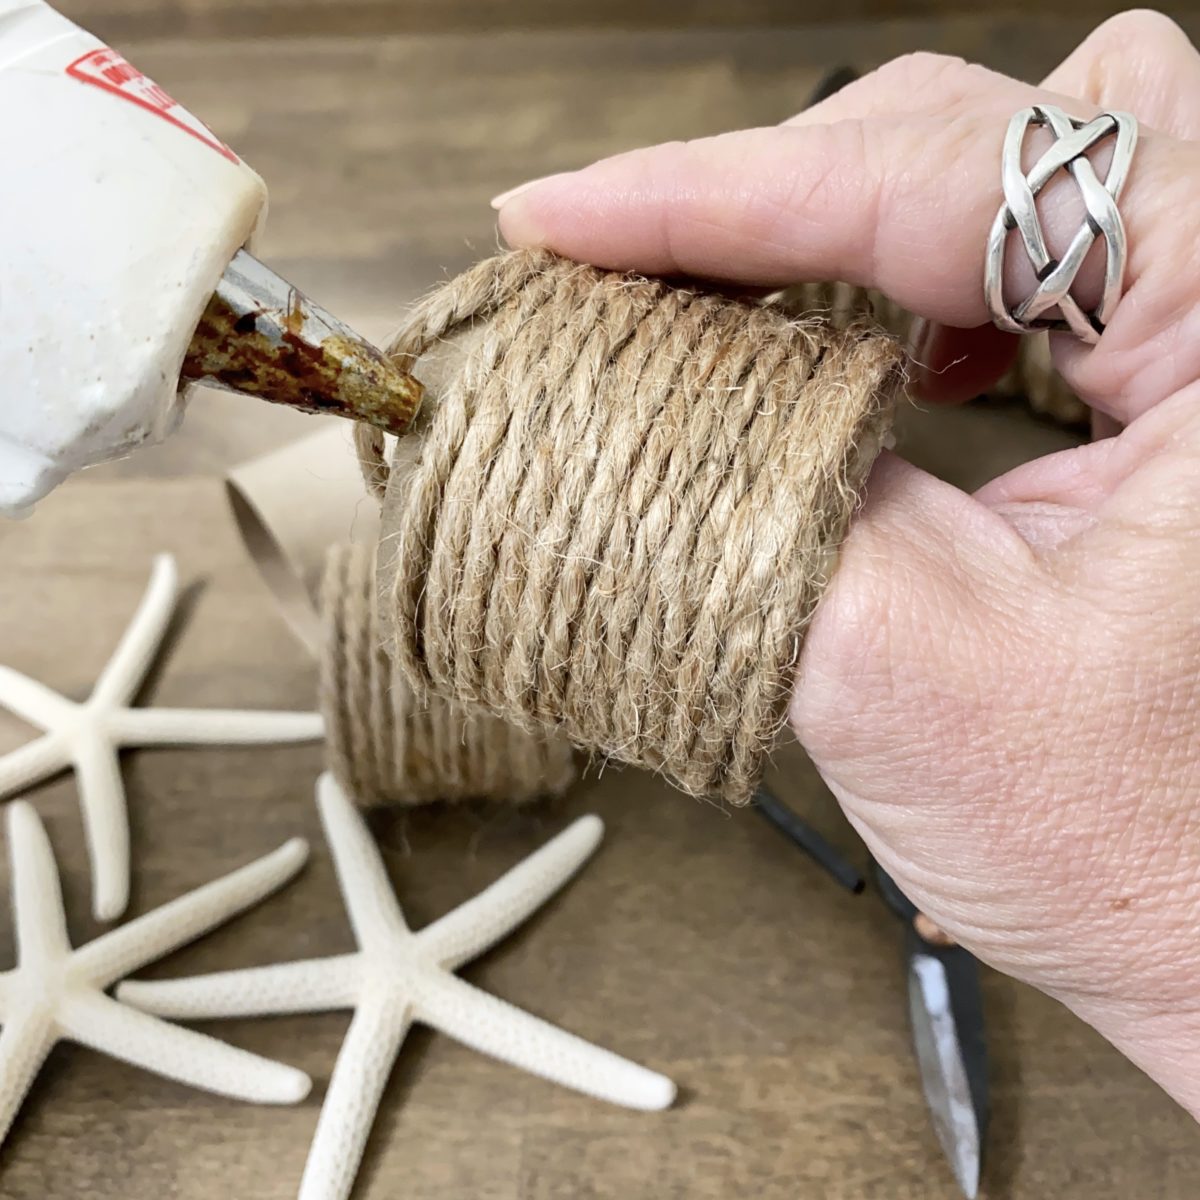 Applying hot glue to the other edge of the cardboard ring to secure the end of the twine wrap.